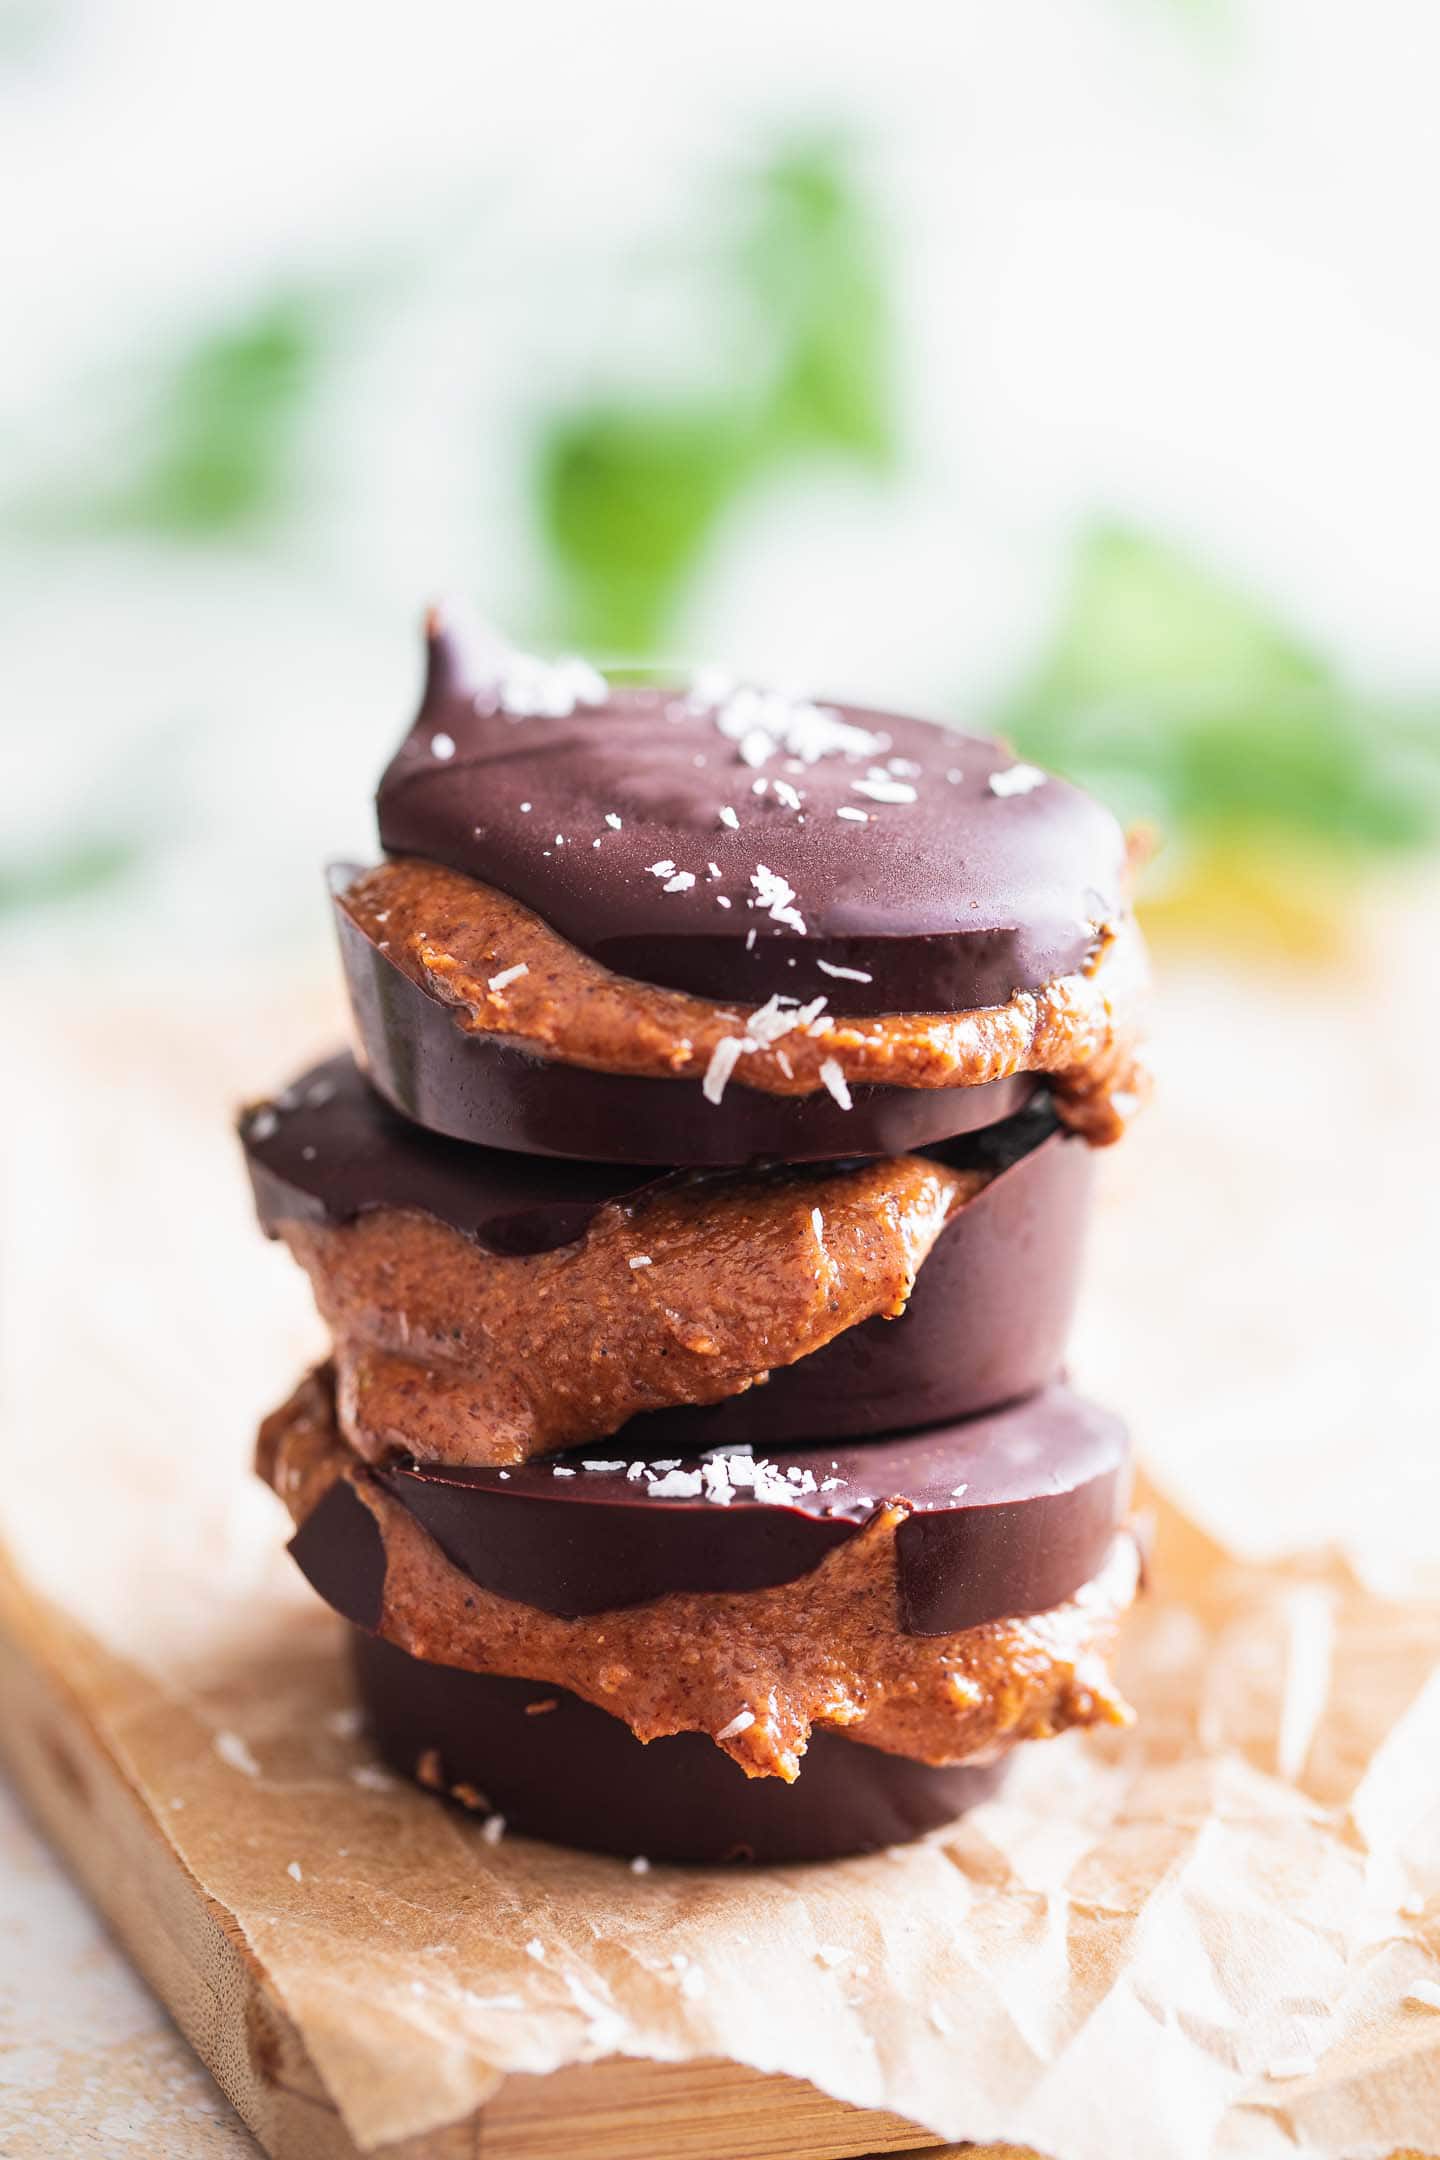 Vegan snacks with chocolate and peanut butter